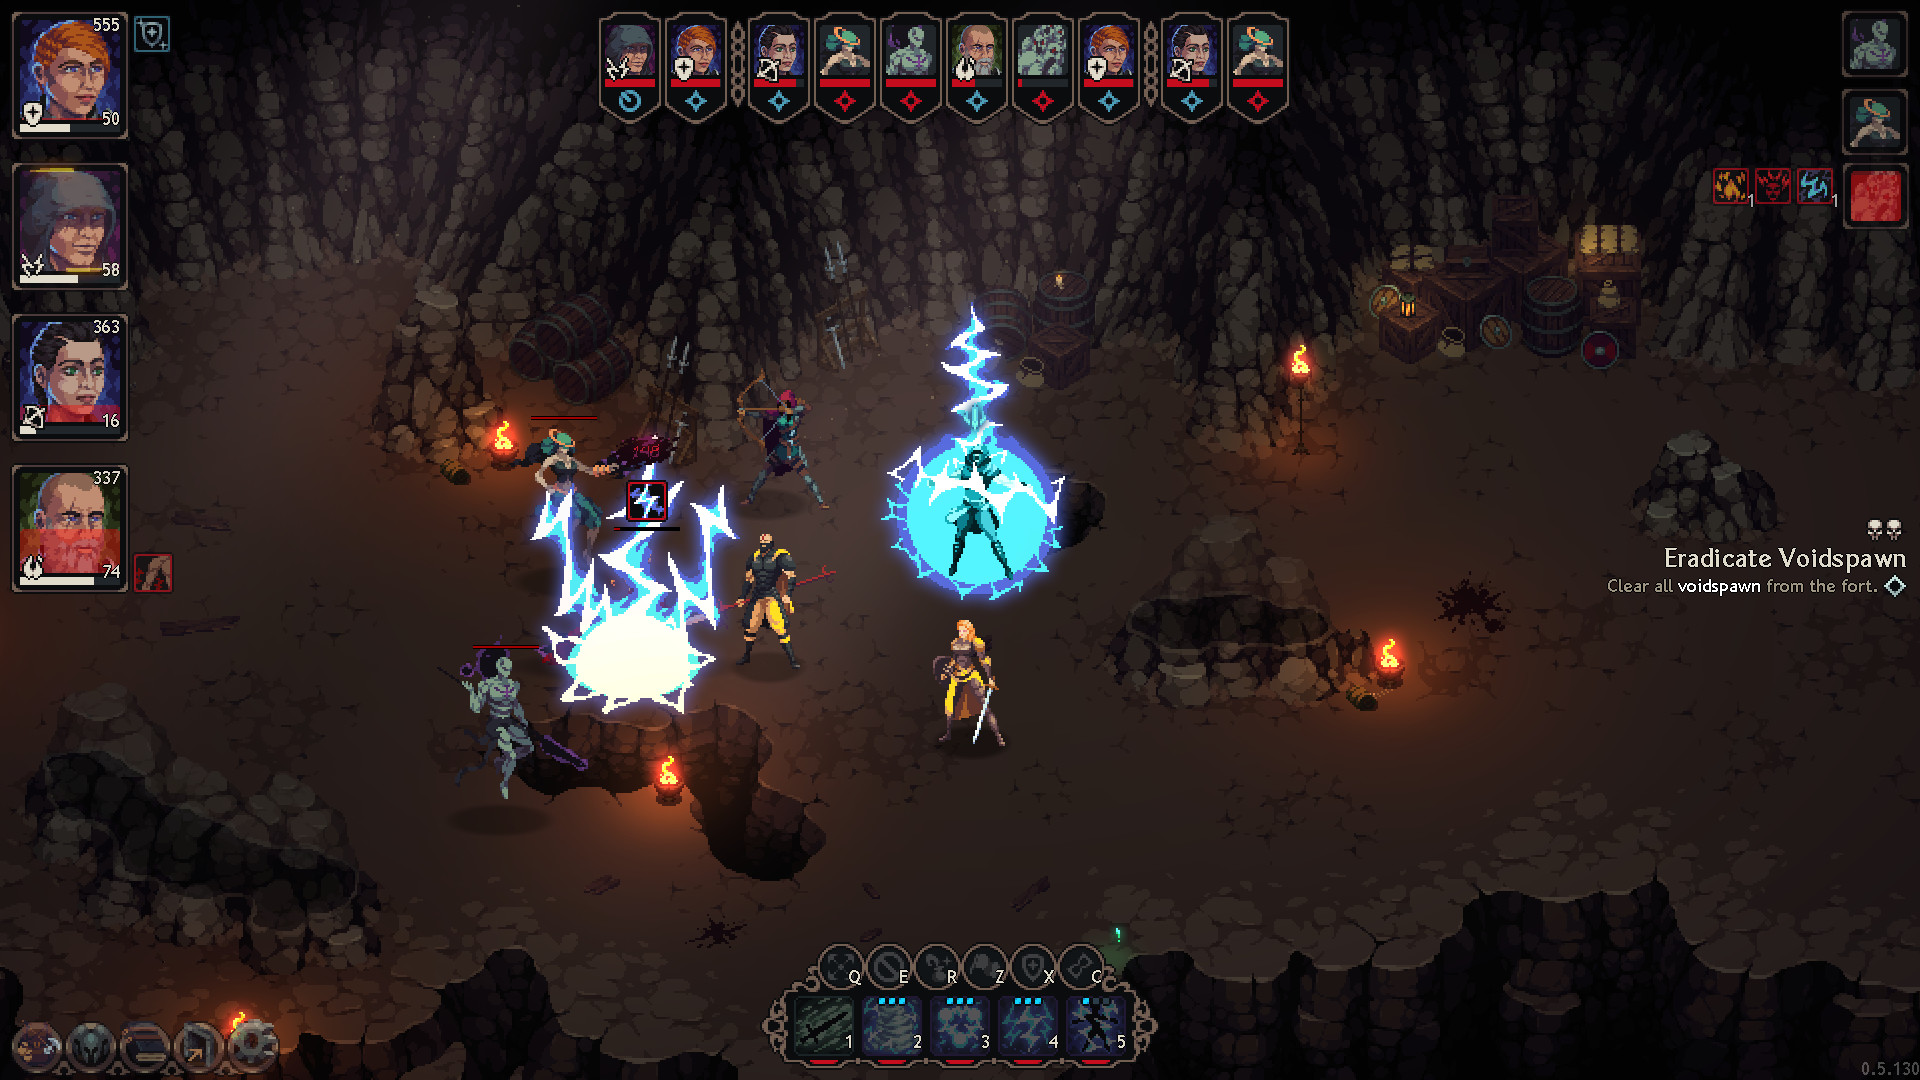 A powerful wizard pulls on electricity to fry their foes in the pixelated world of The Iron Oath, a strategy RPG leaving early access.